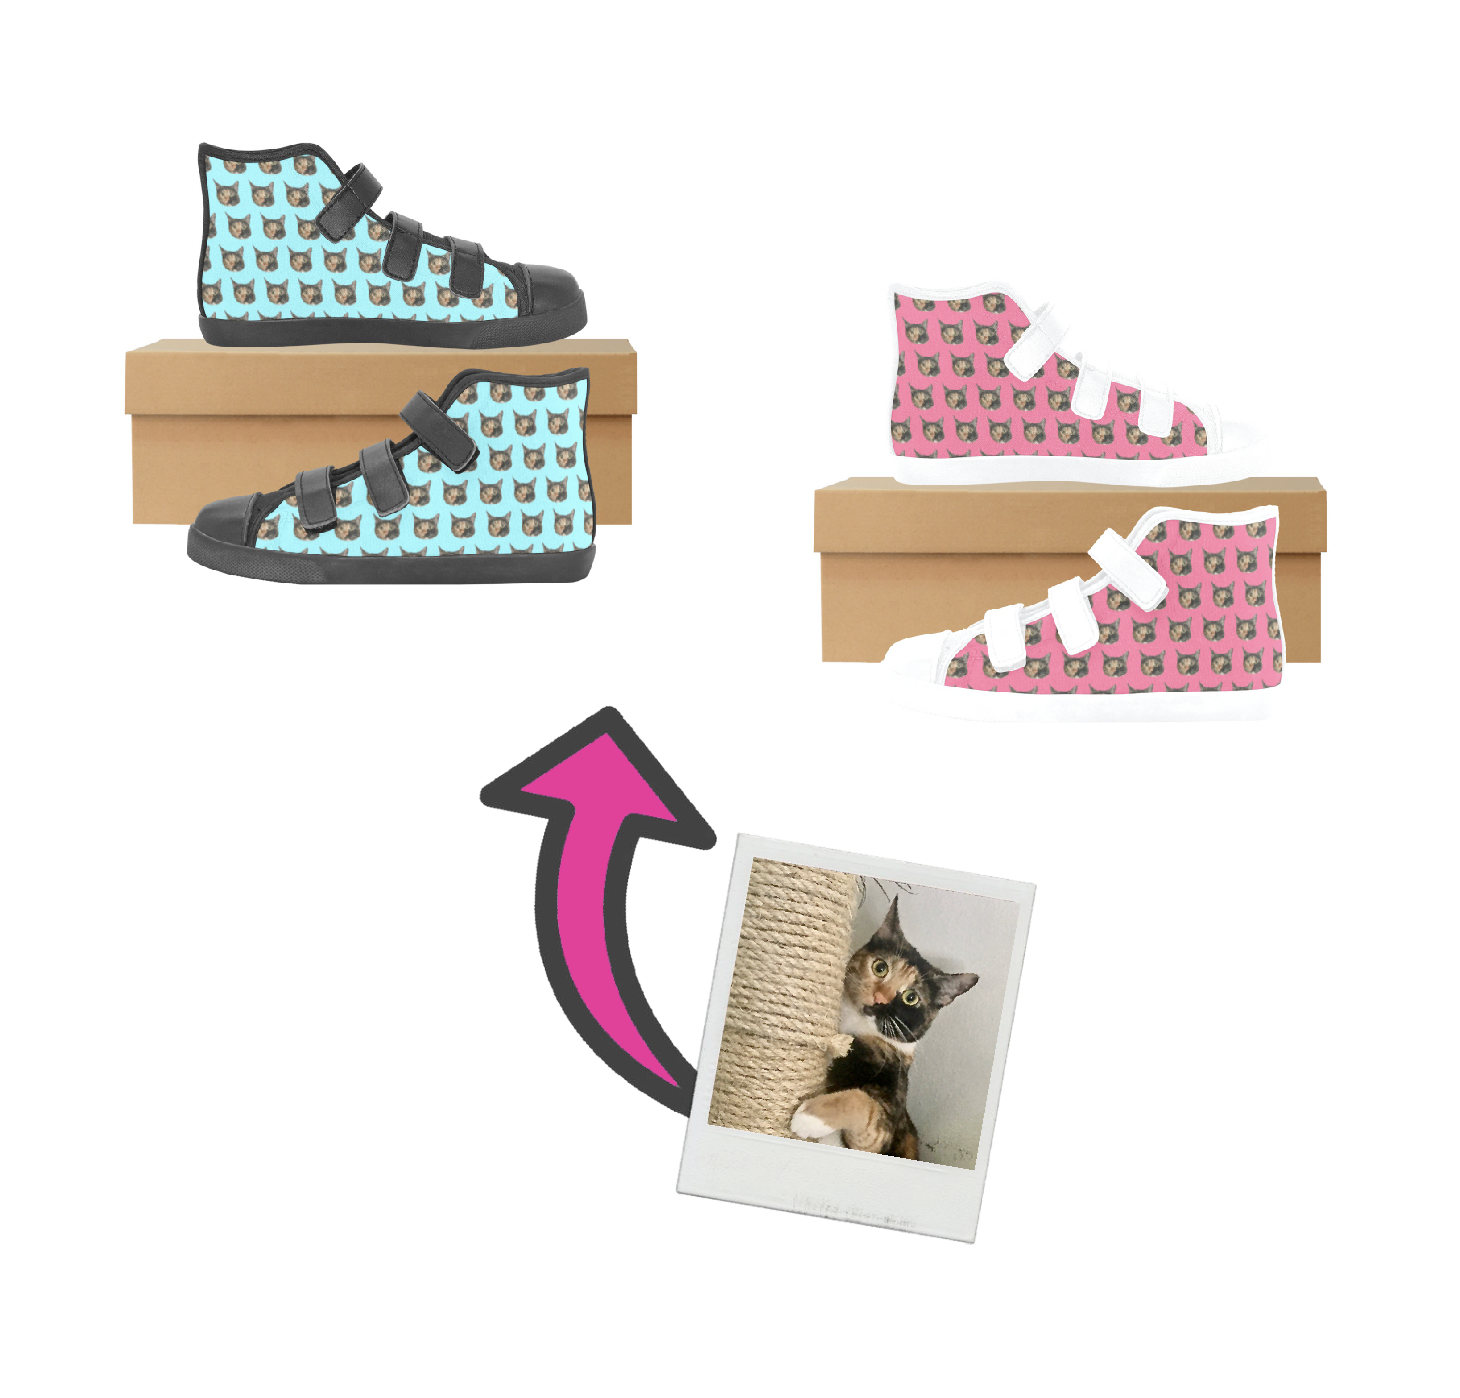 👸🏽🤴🏽👟 Custom Personalized Photo Velcro High Top Canvas Kid's Shoes, Design your own Kids Shoes, Face Shoes, Pet Shoes, Gift for kids, any color, 5 sizes